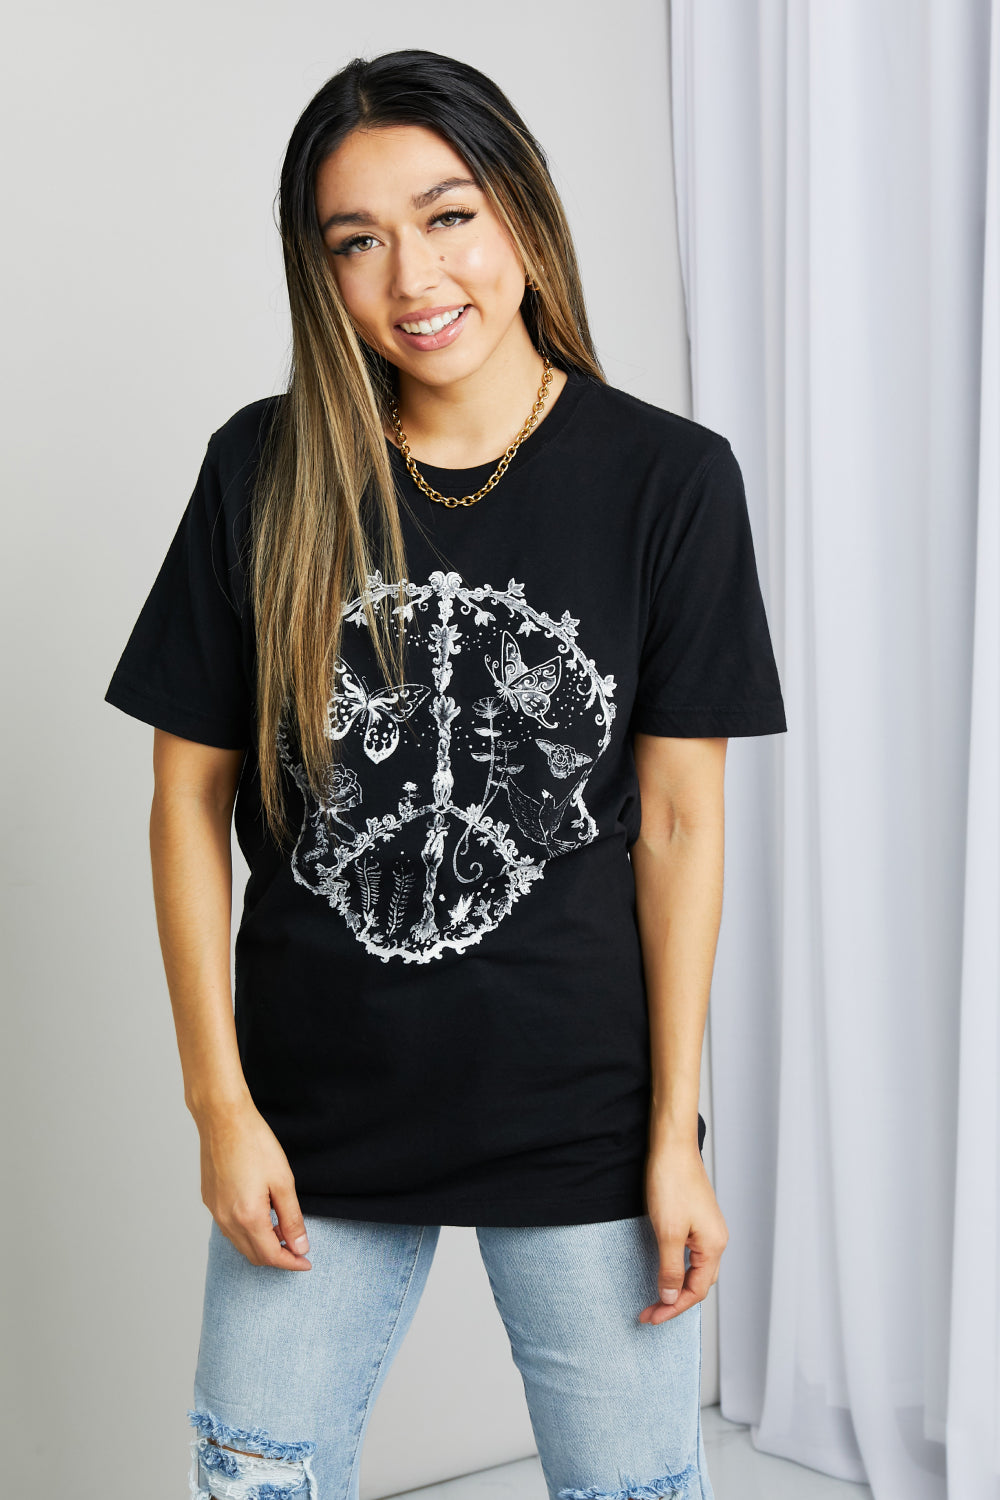 mineB Butterfly Graphic Tee Shirt mineB